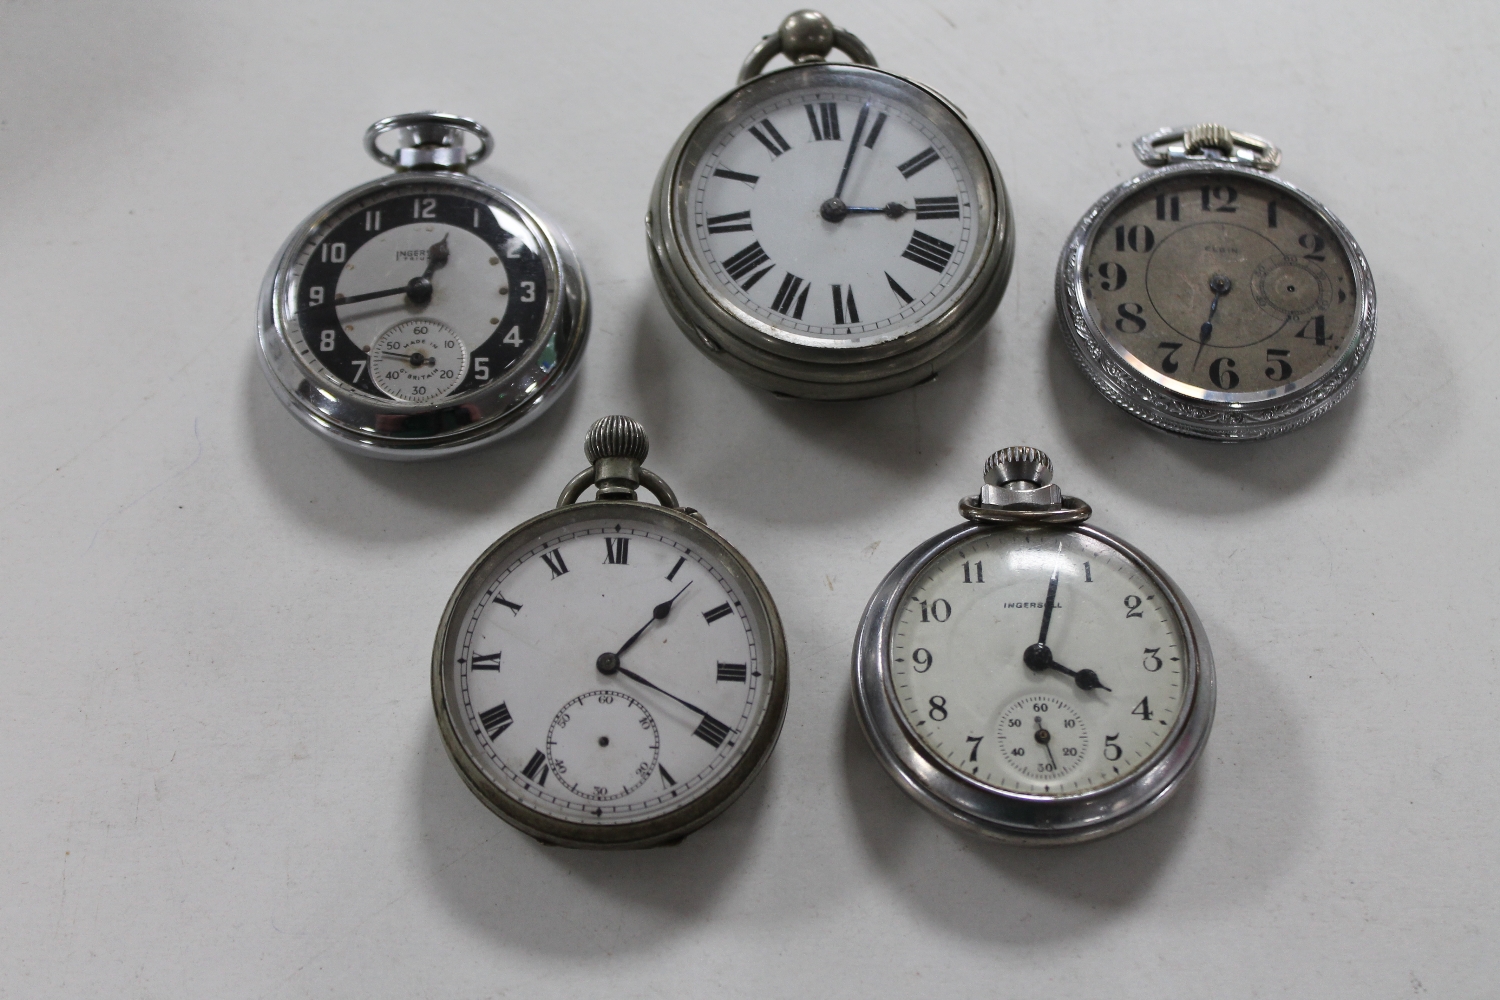 A box of five various pocket watches - Elgin,